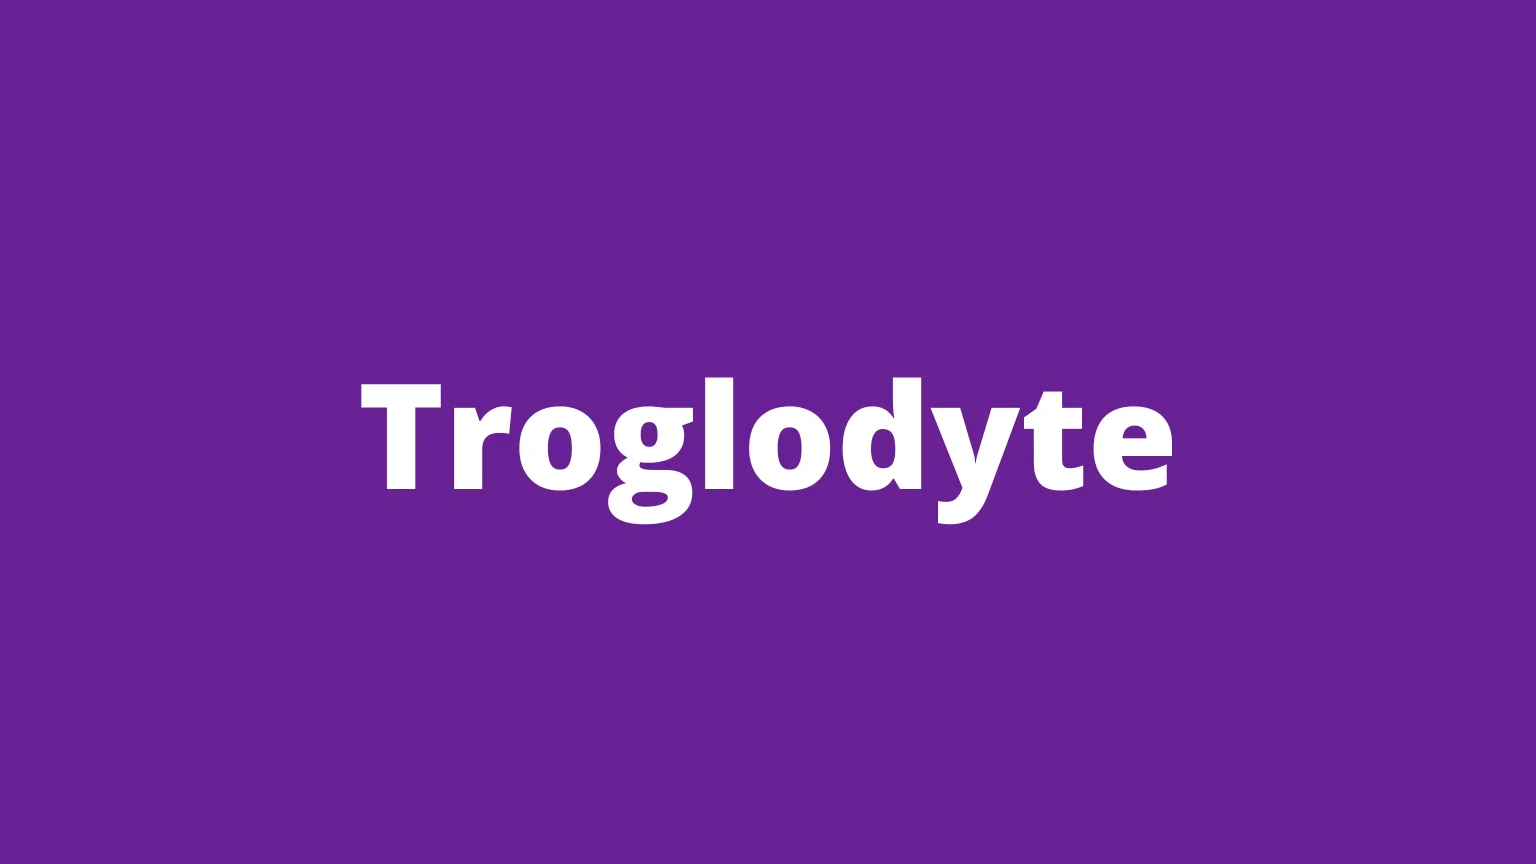 The word troglodyte and its meaning